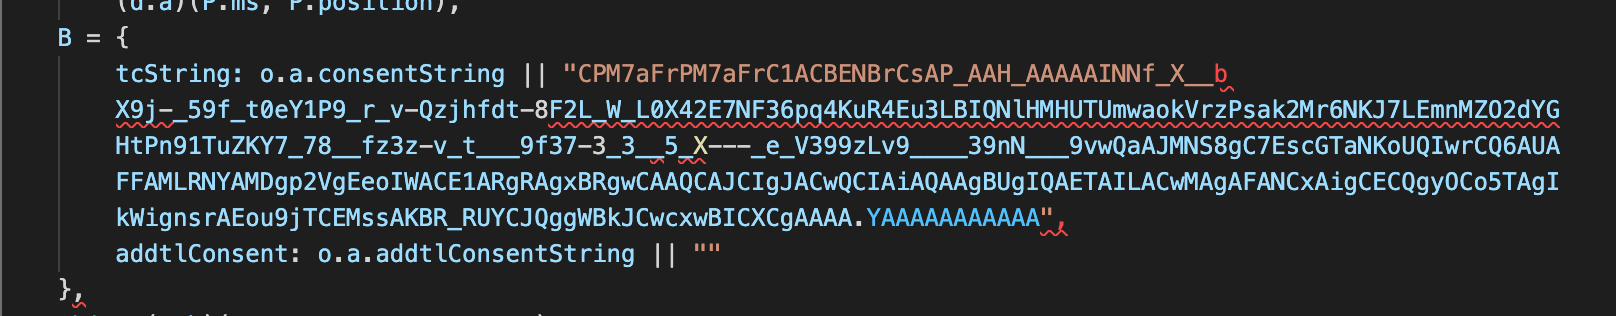 Hardcoded consent string found in Marfeel Ad Tag Code